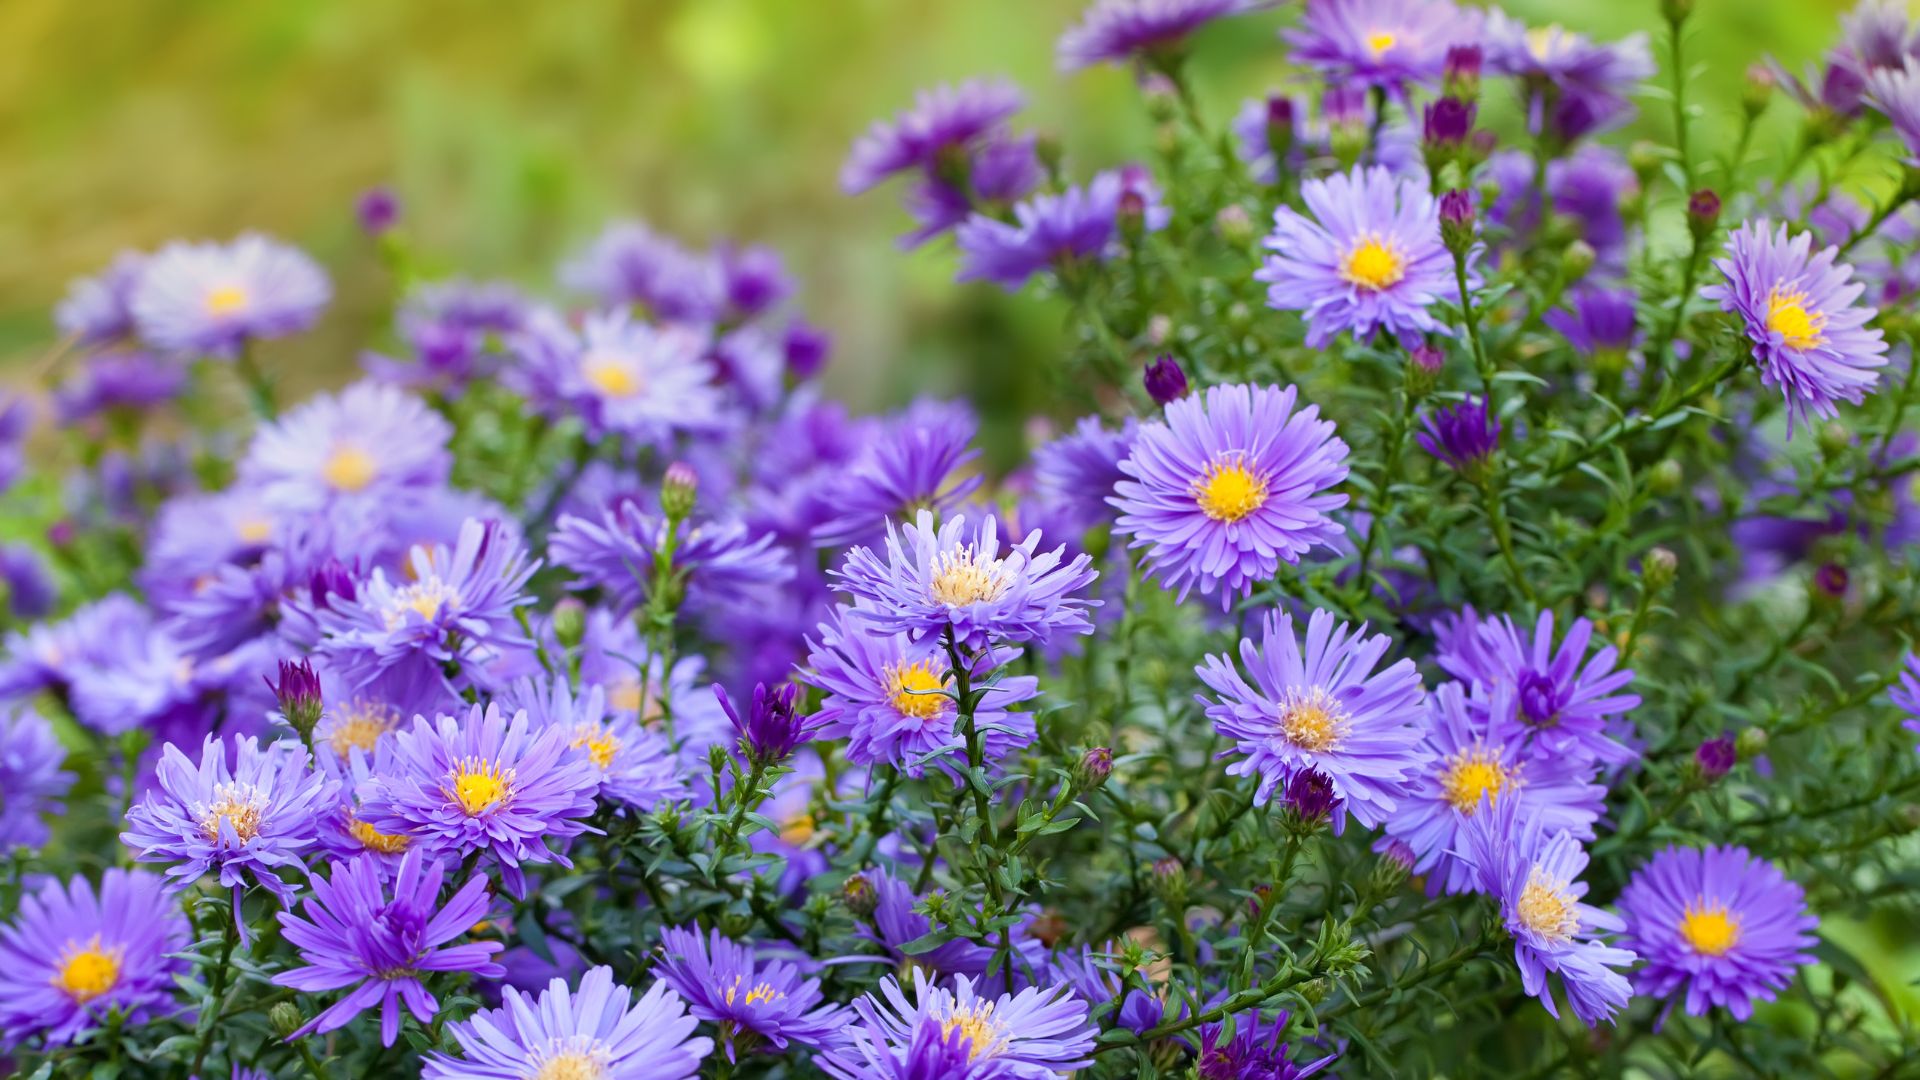 Get Your Fall Garden Started With ‘October Skies’ Asters